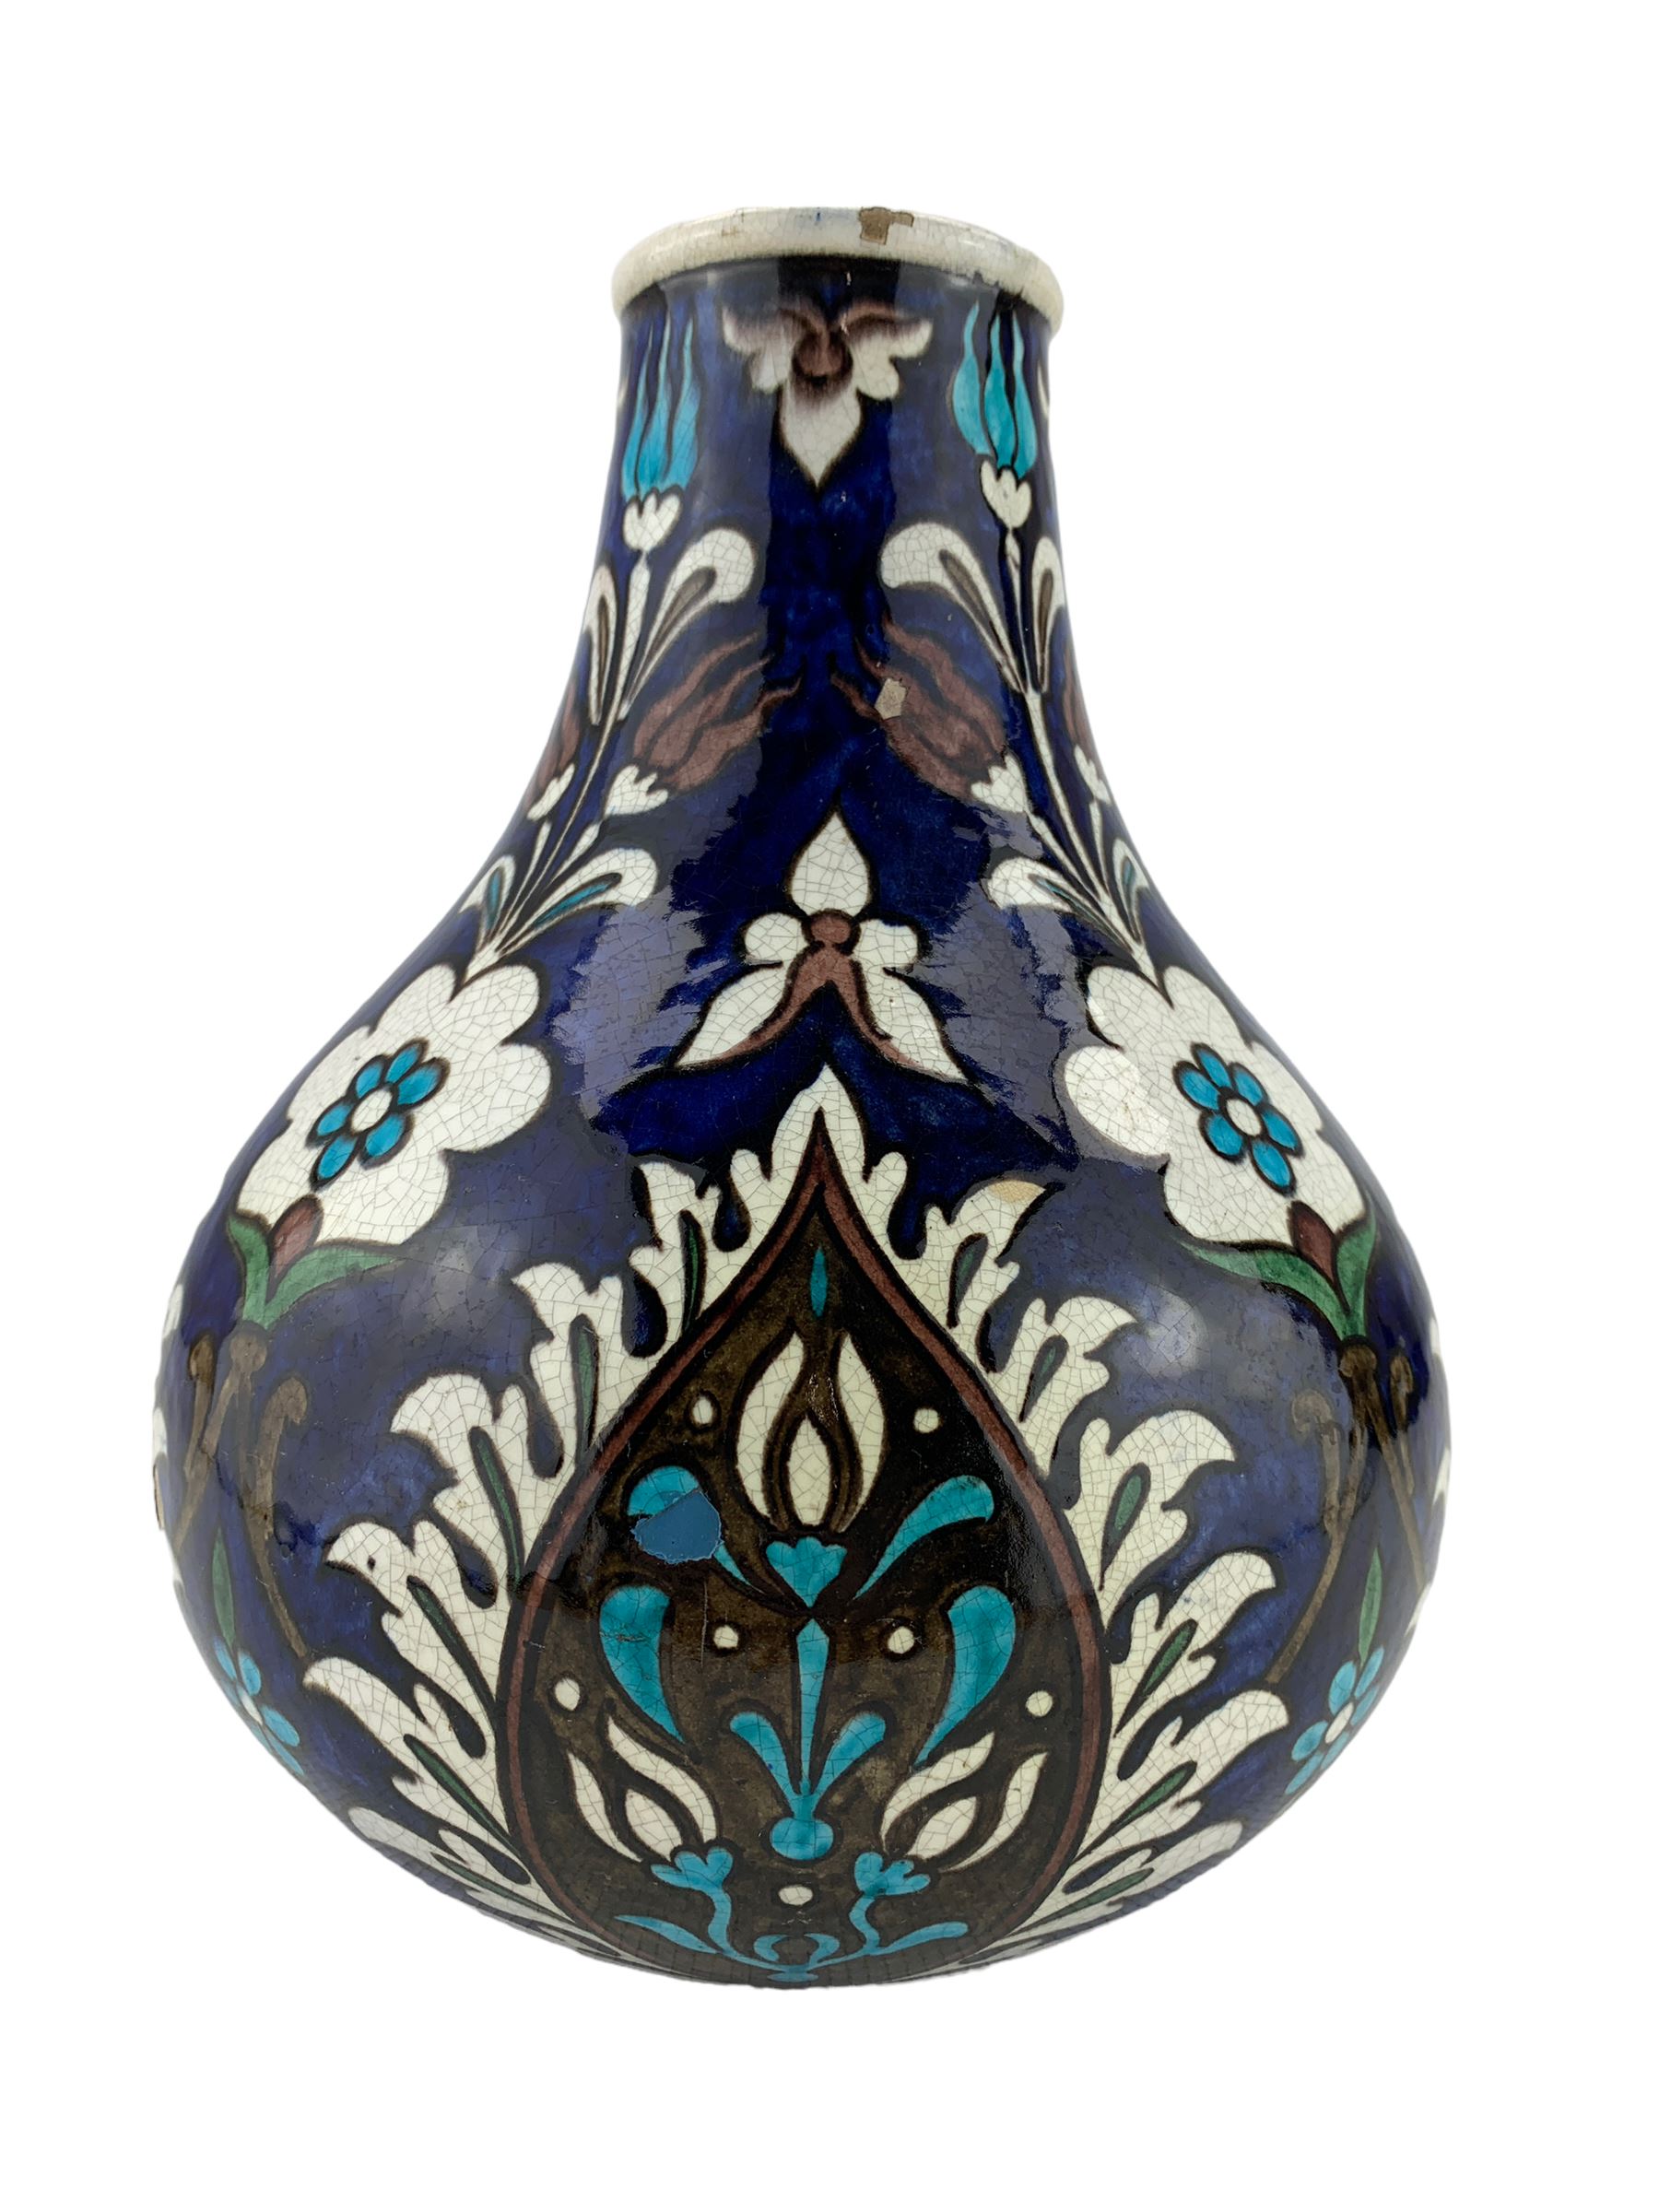 Burmantofts Faience Anglo-Persian bottle vase - Image 4 of 7